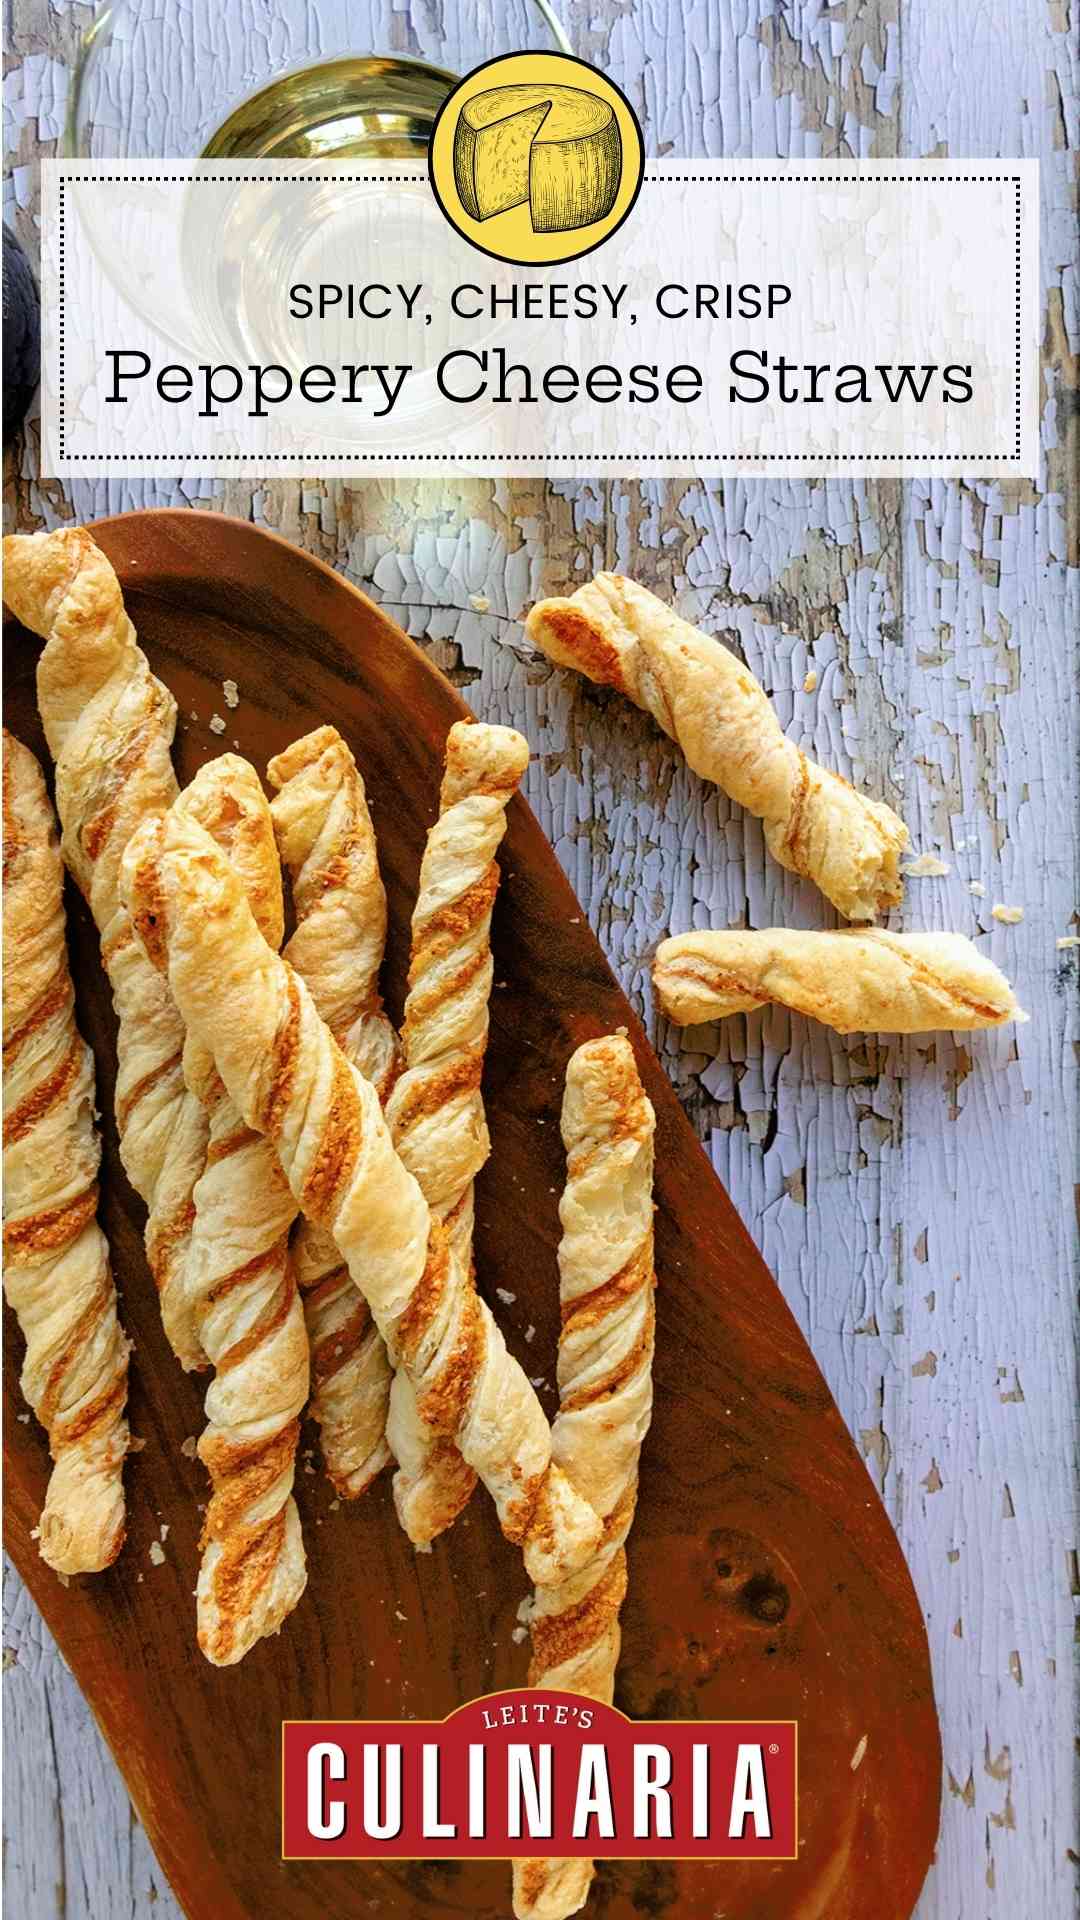 Cheese straws on an oval wooden platter on a distressed wooden surface.